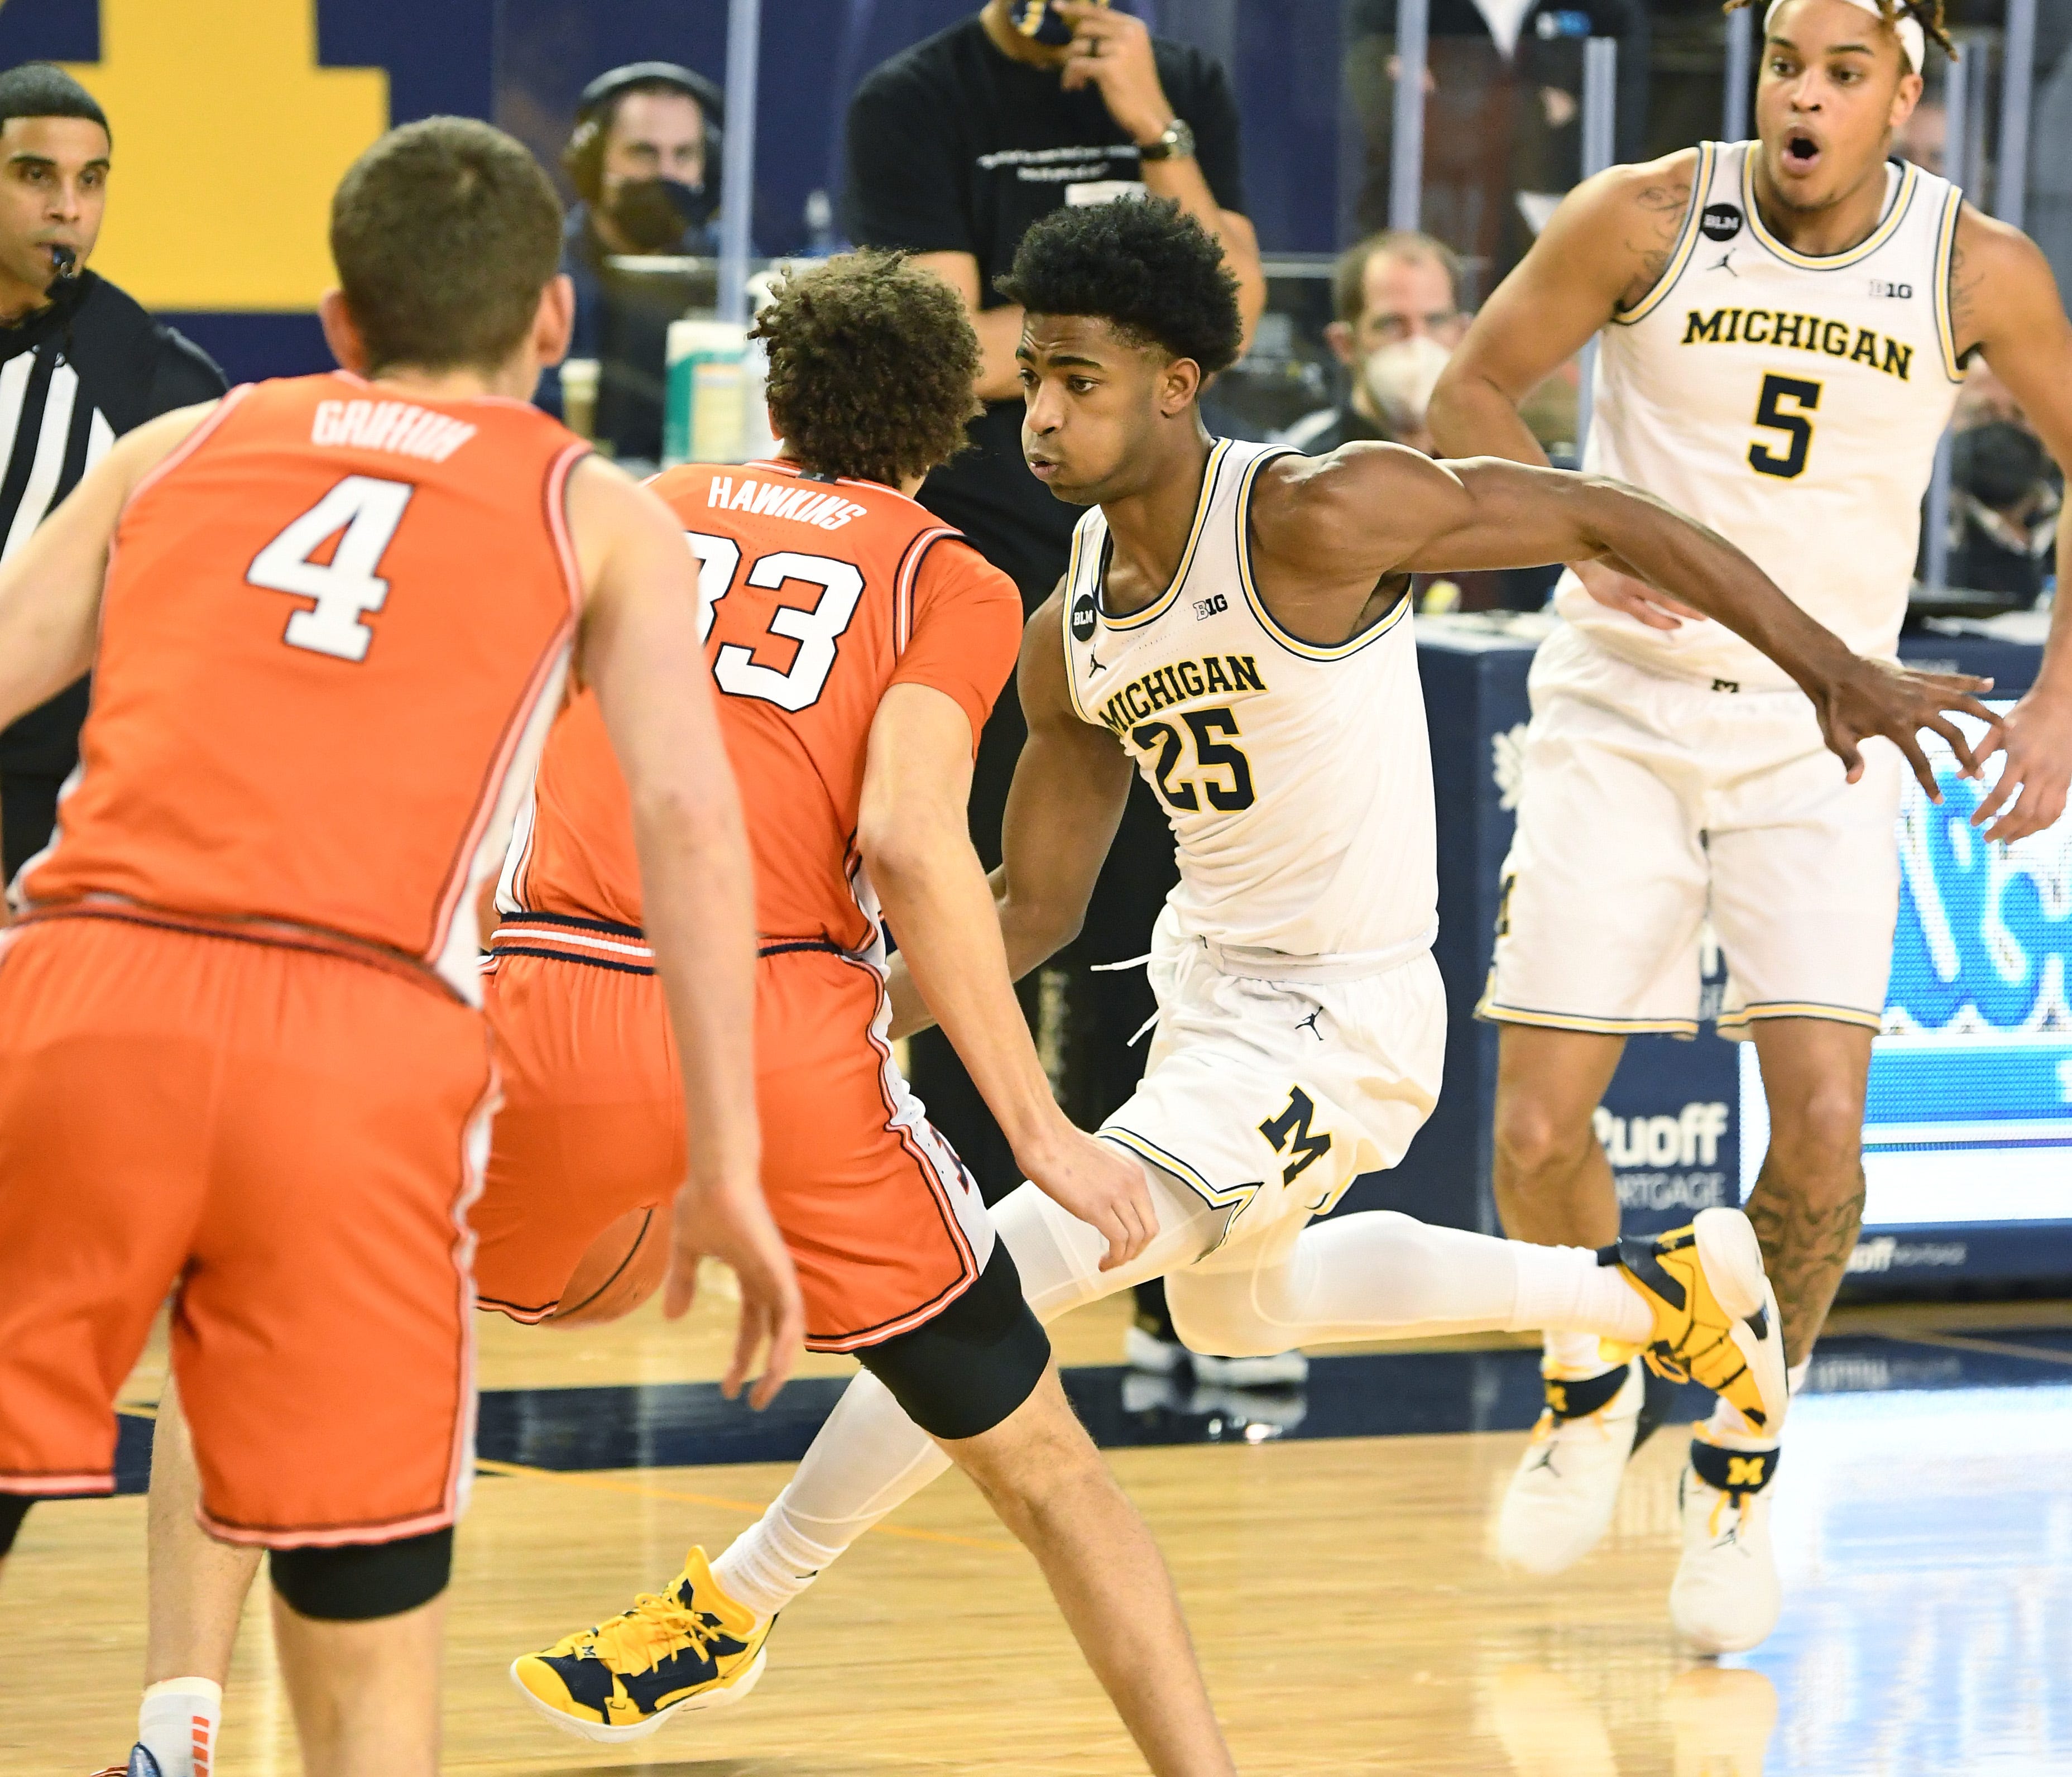 Michigan's Jace Howard brings the ball up court late in the second half.